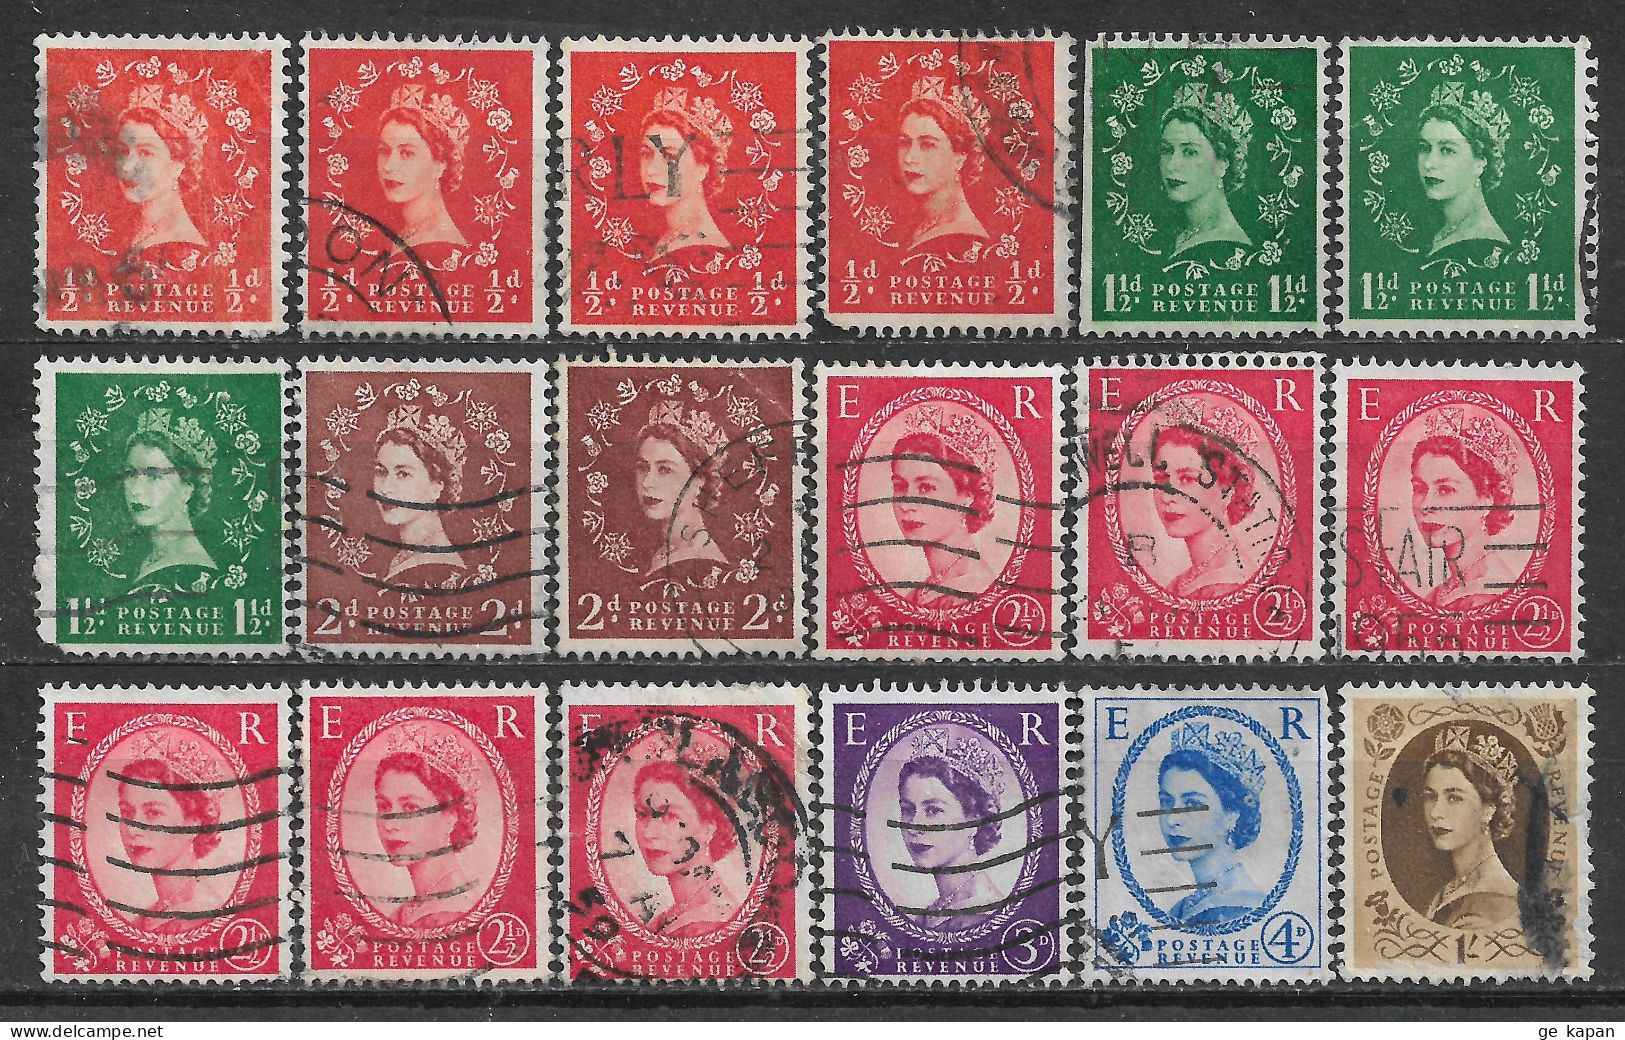 1952-1953 GREAT BRITAIN Set Of 18 USED STAMPS (Scott # 292,294-298,306) CV $5.60 - Used Stamps